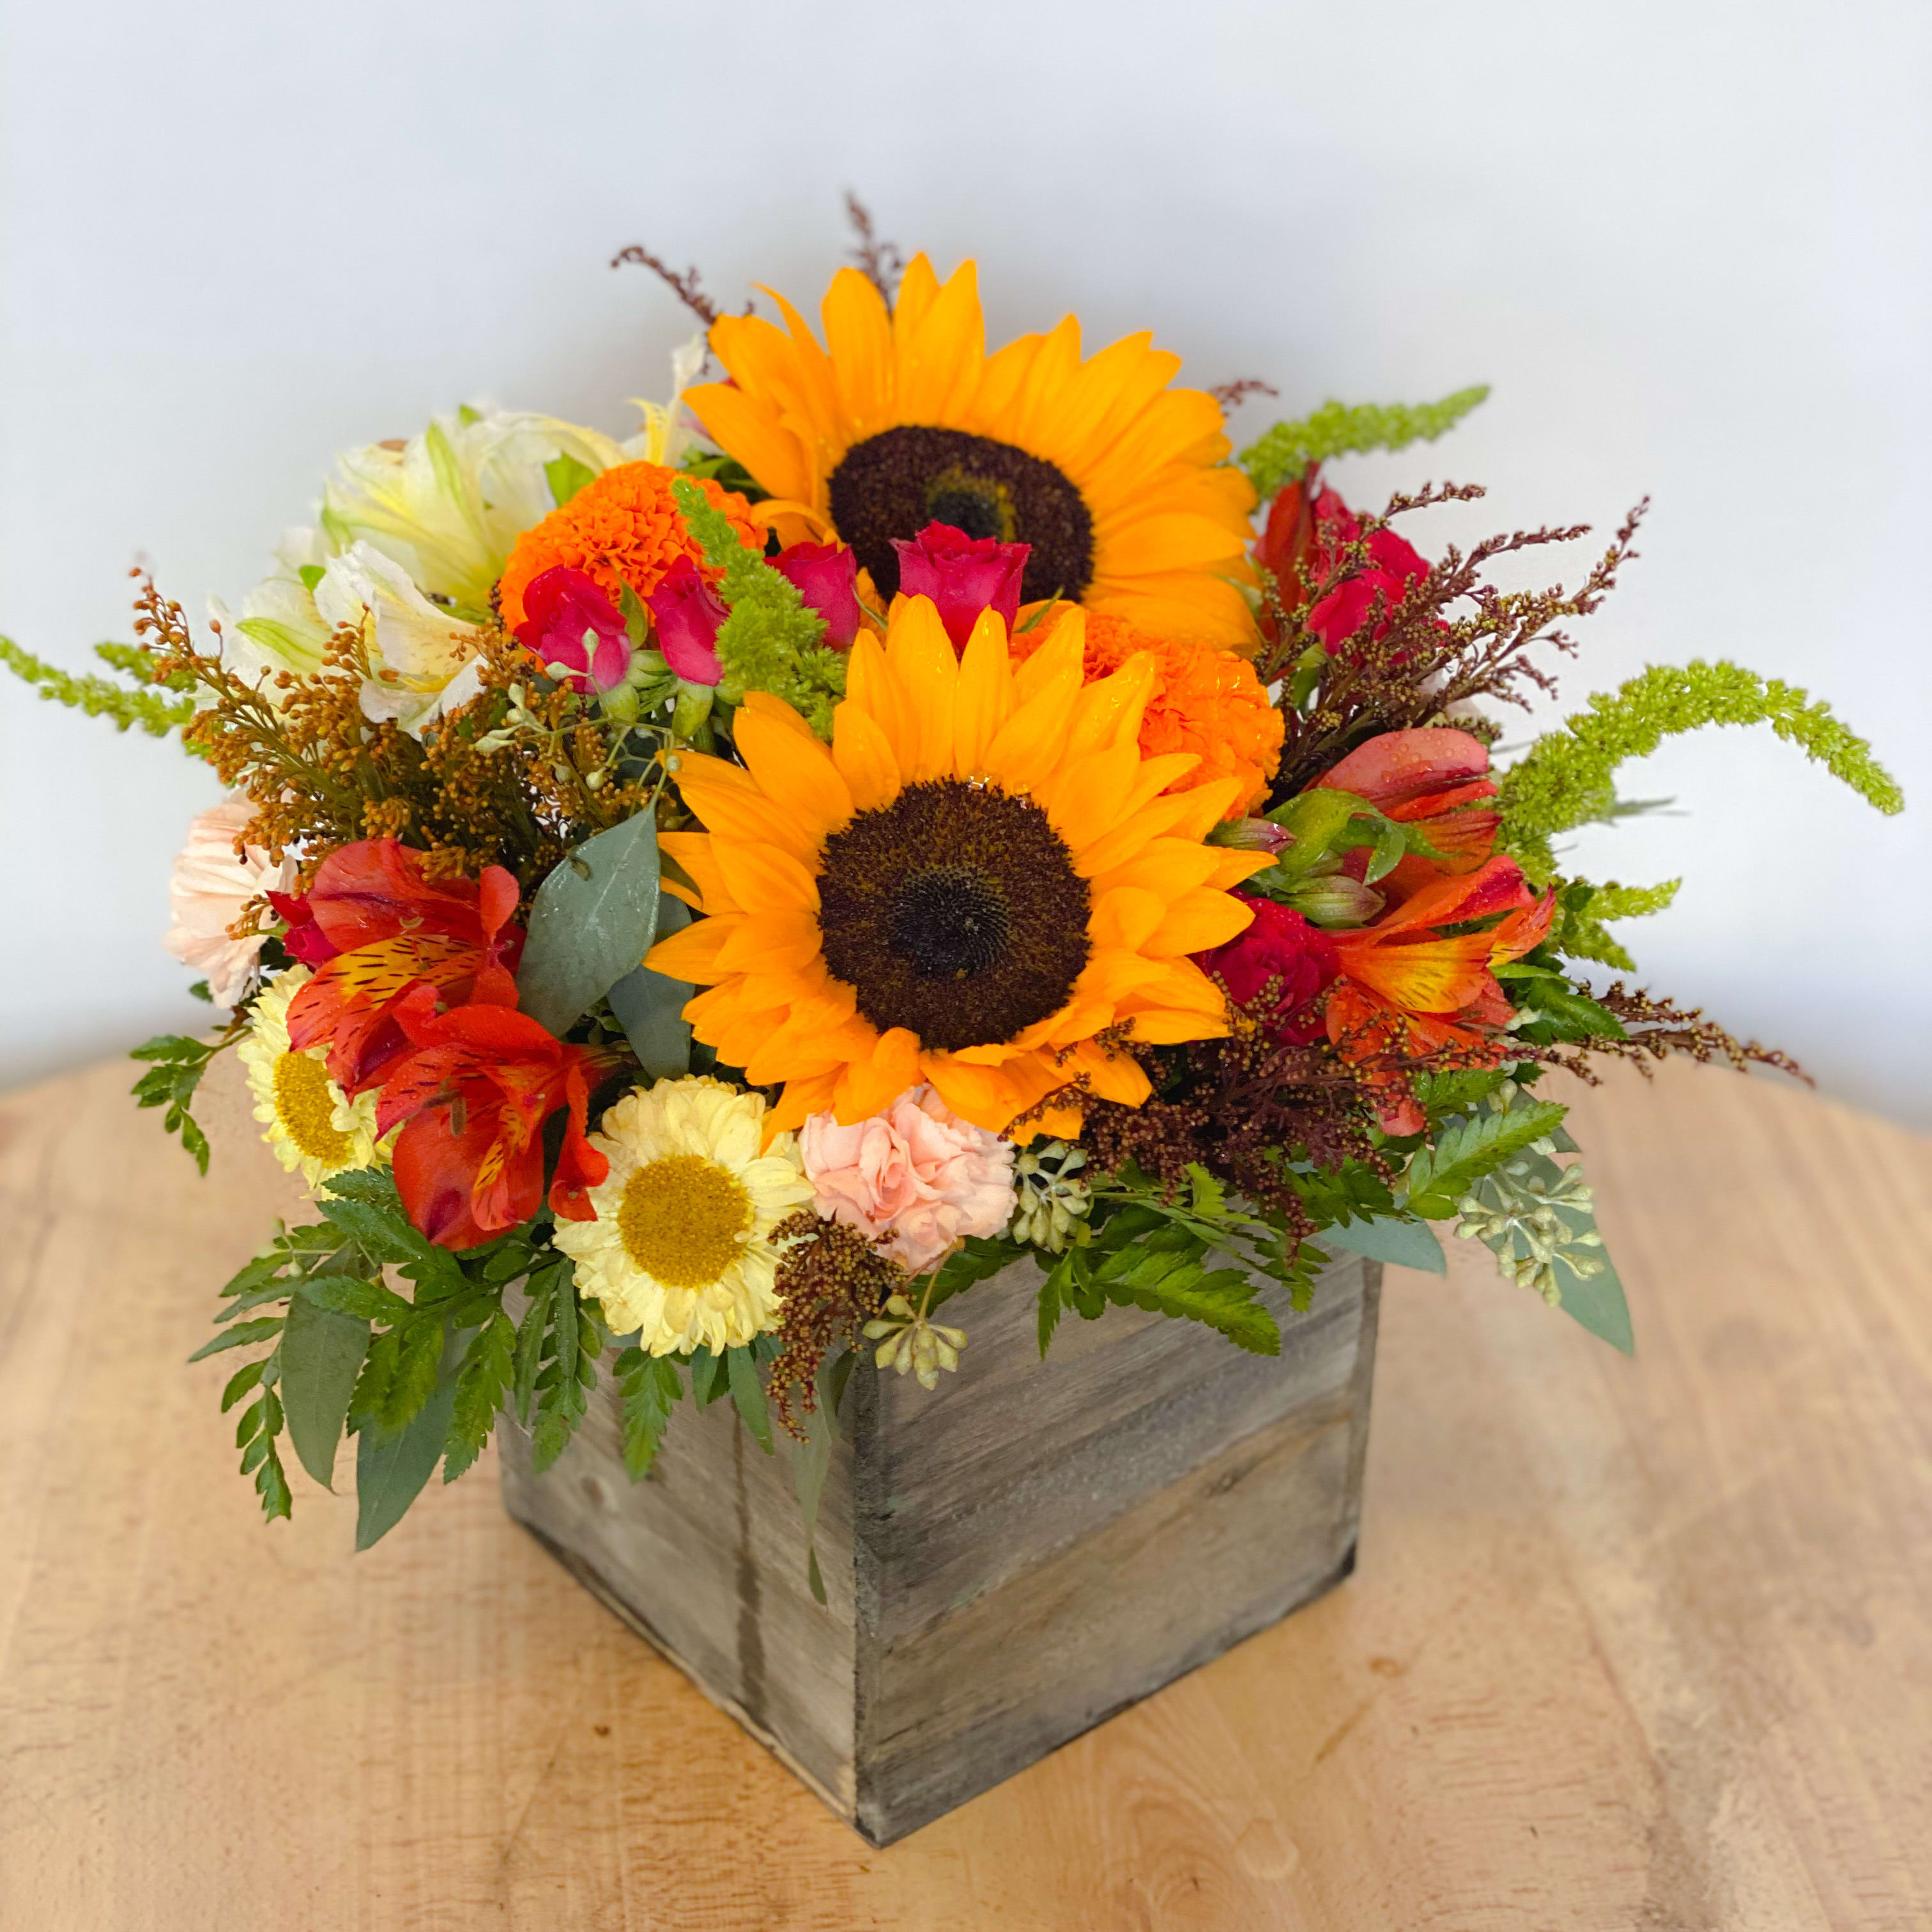 A Box Of Cheer  - A box full of cheerfulness to send to your family and friends! This bouquet of sunflowers, roses, matsumoto asters and alstroemerias arranged bright and beautiful in this keepsake textured wood container will definitely be a great gift for all occasions.   Approximately 9” D